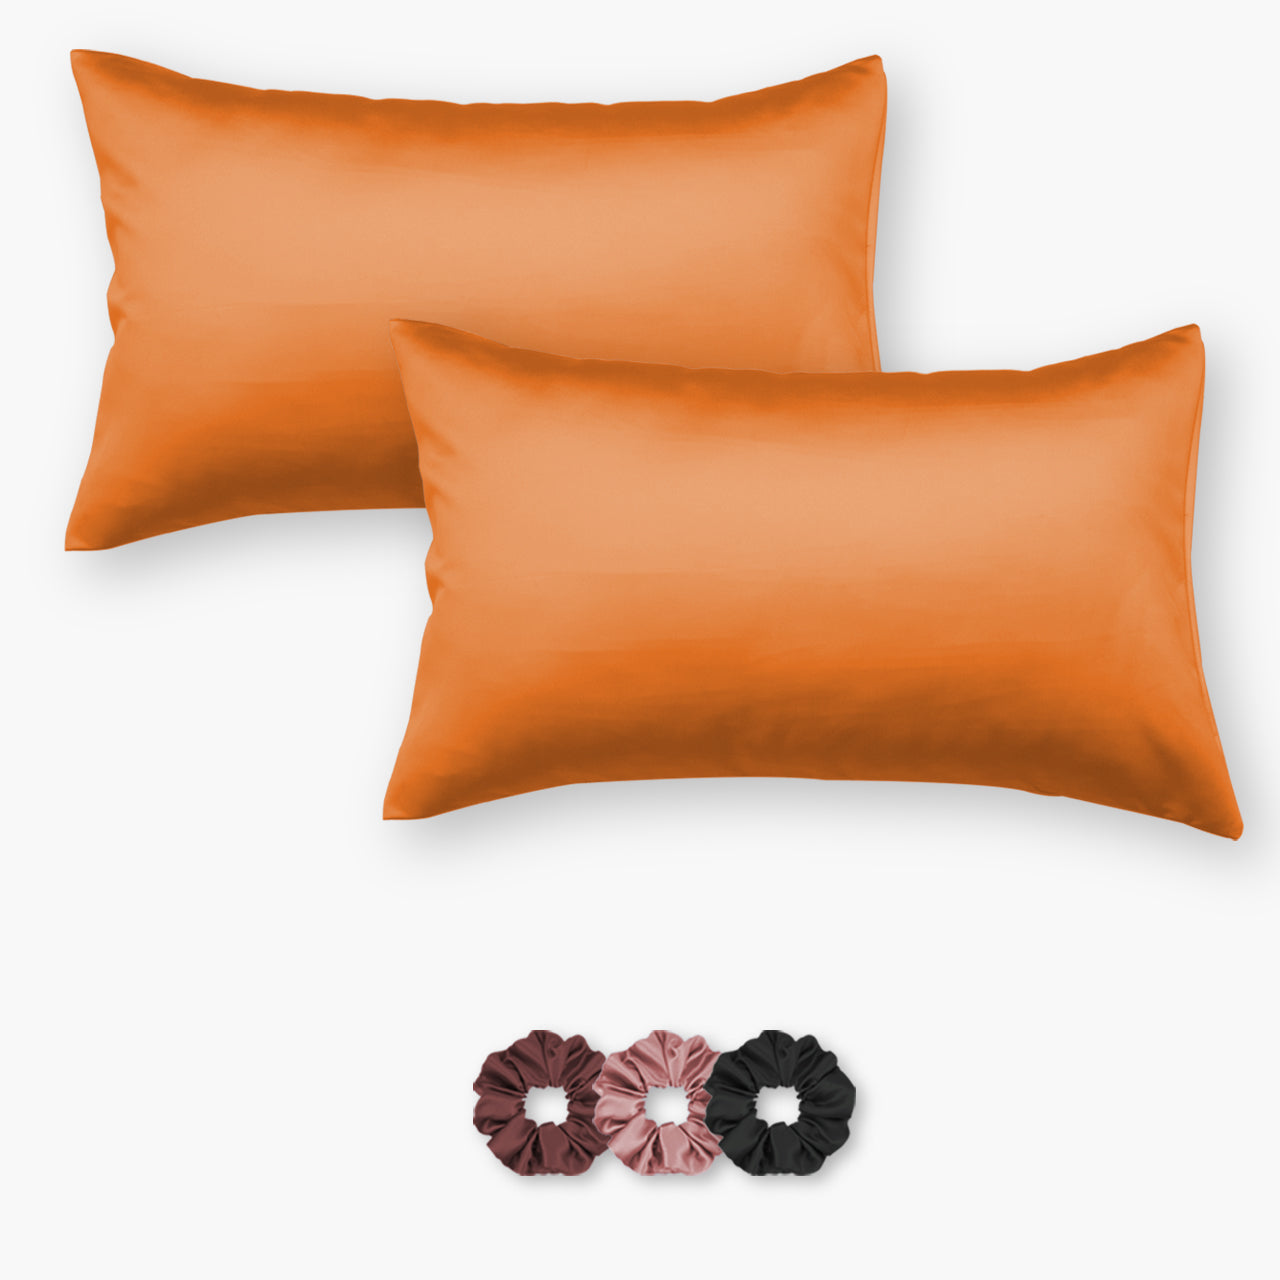 Orange Satin Pillow Covers - Set of 2 (With 3 Free Scrunchies)